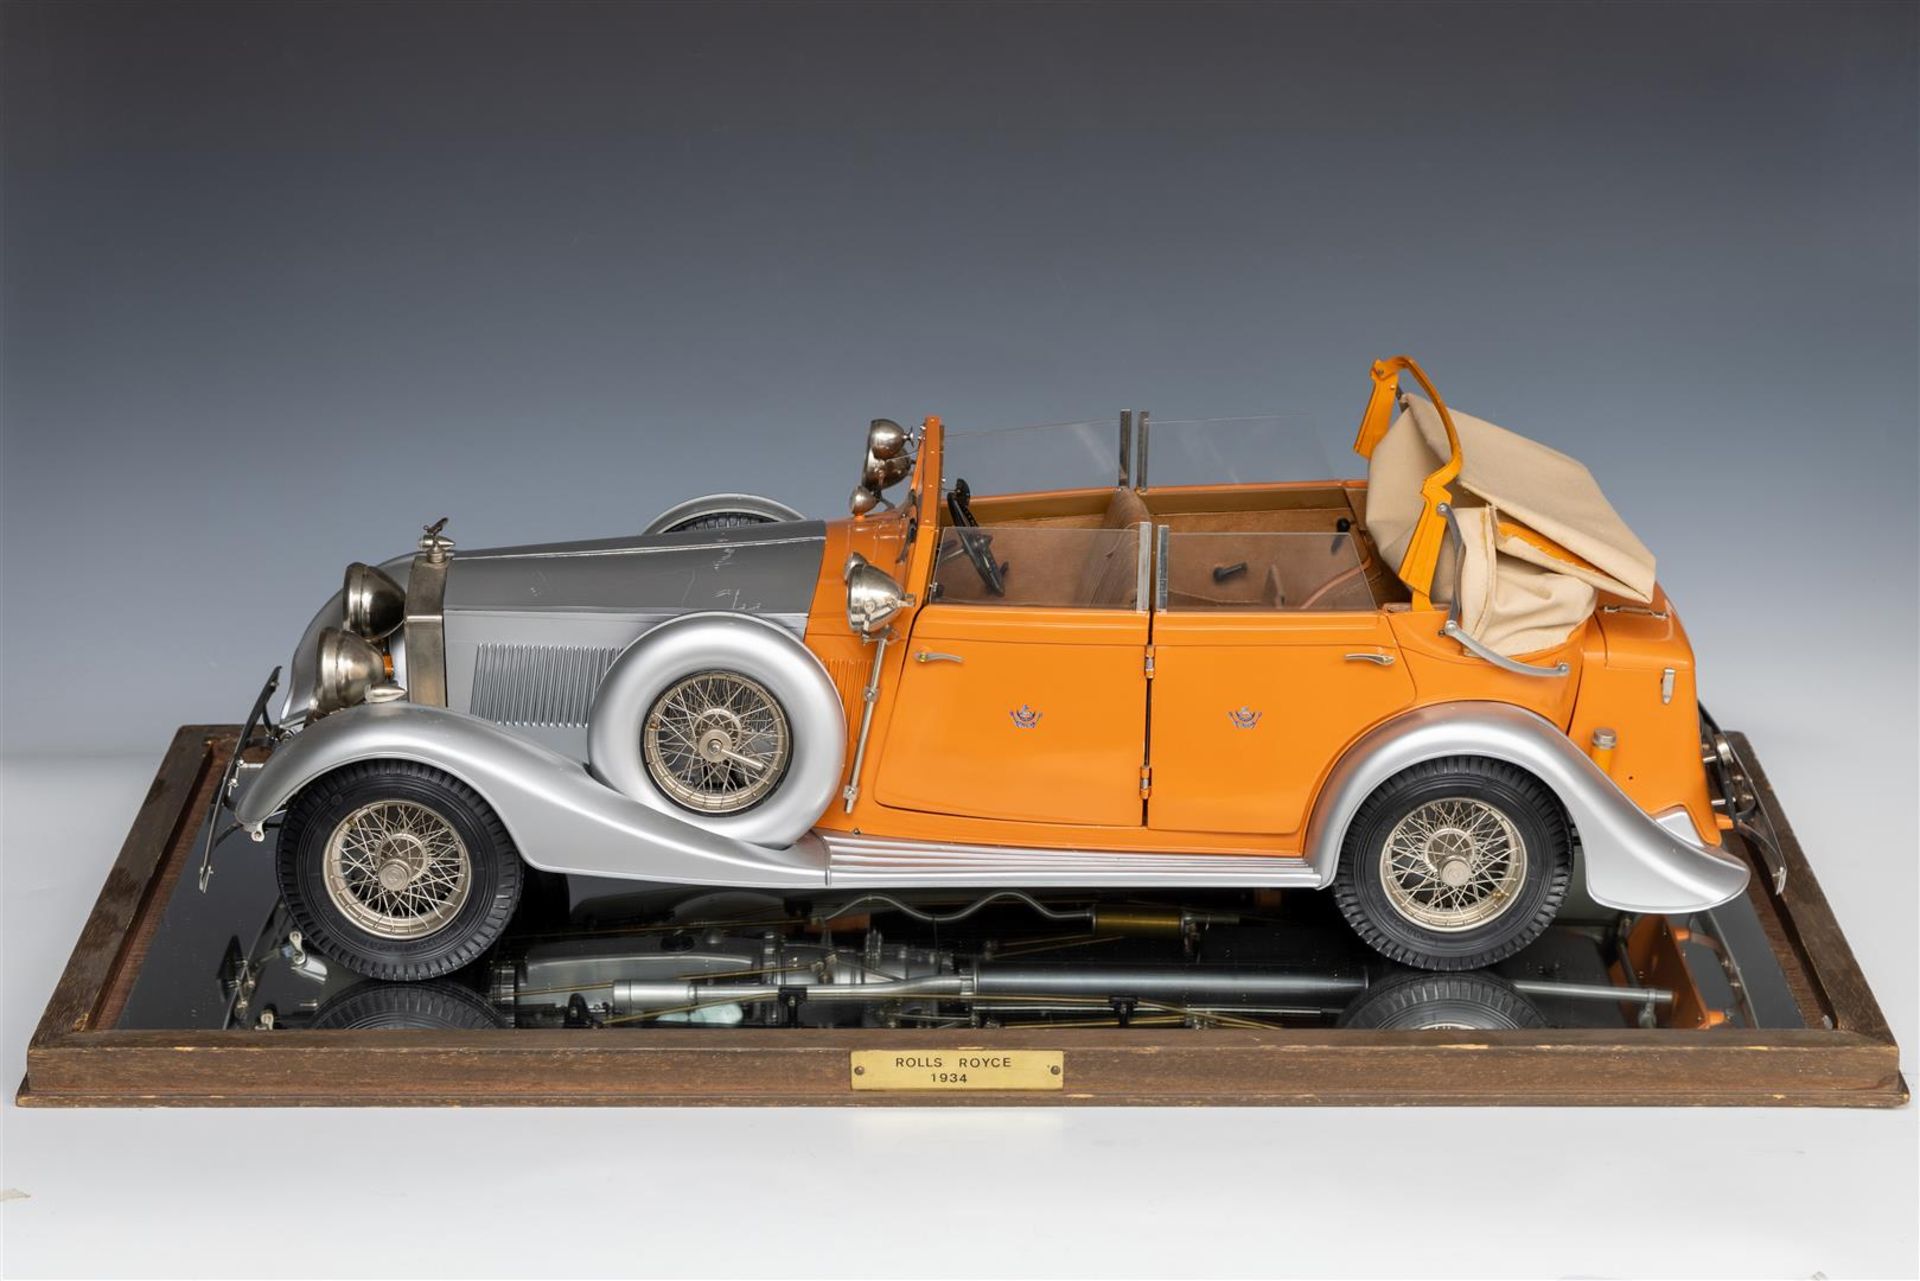 A scale model of a 1937 Rolls Royce. - Image 4 of 6